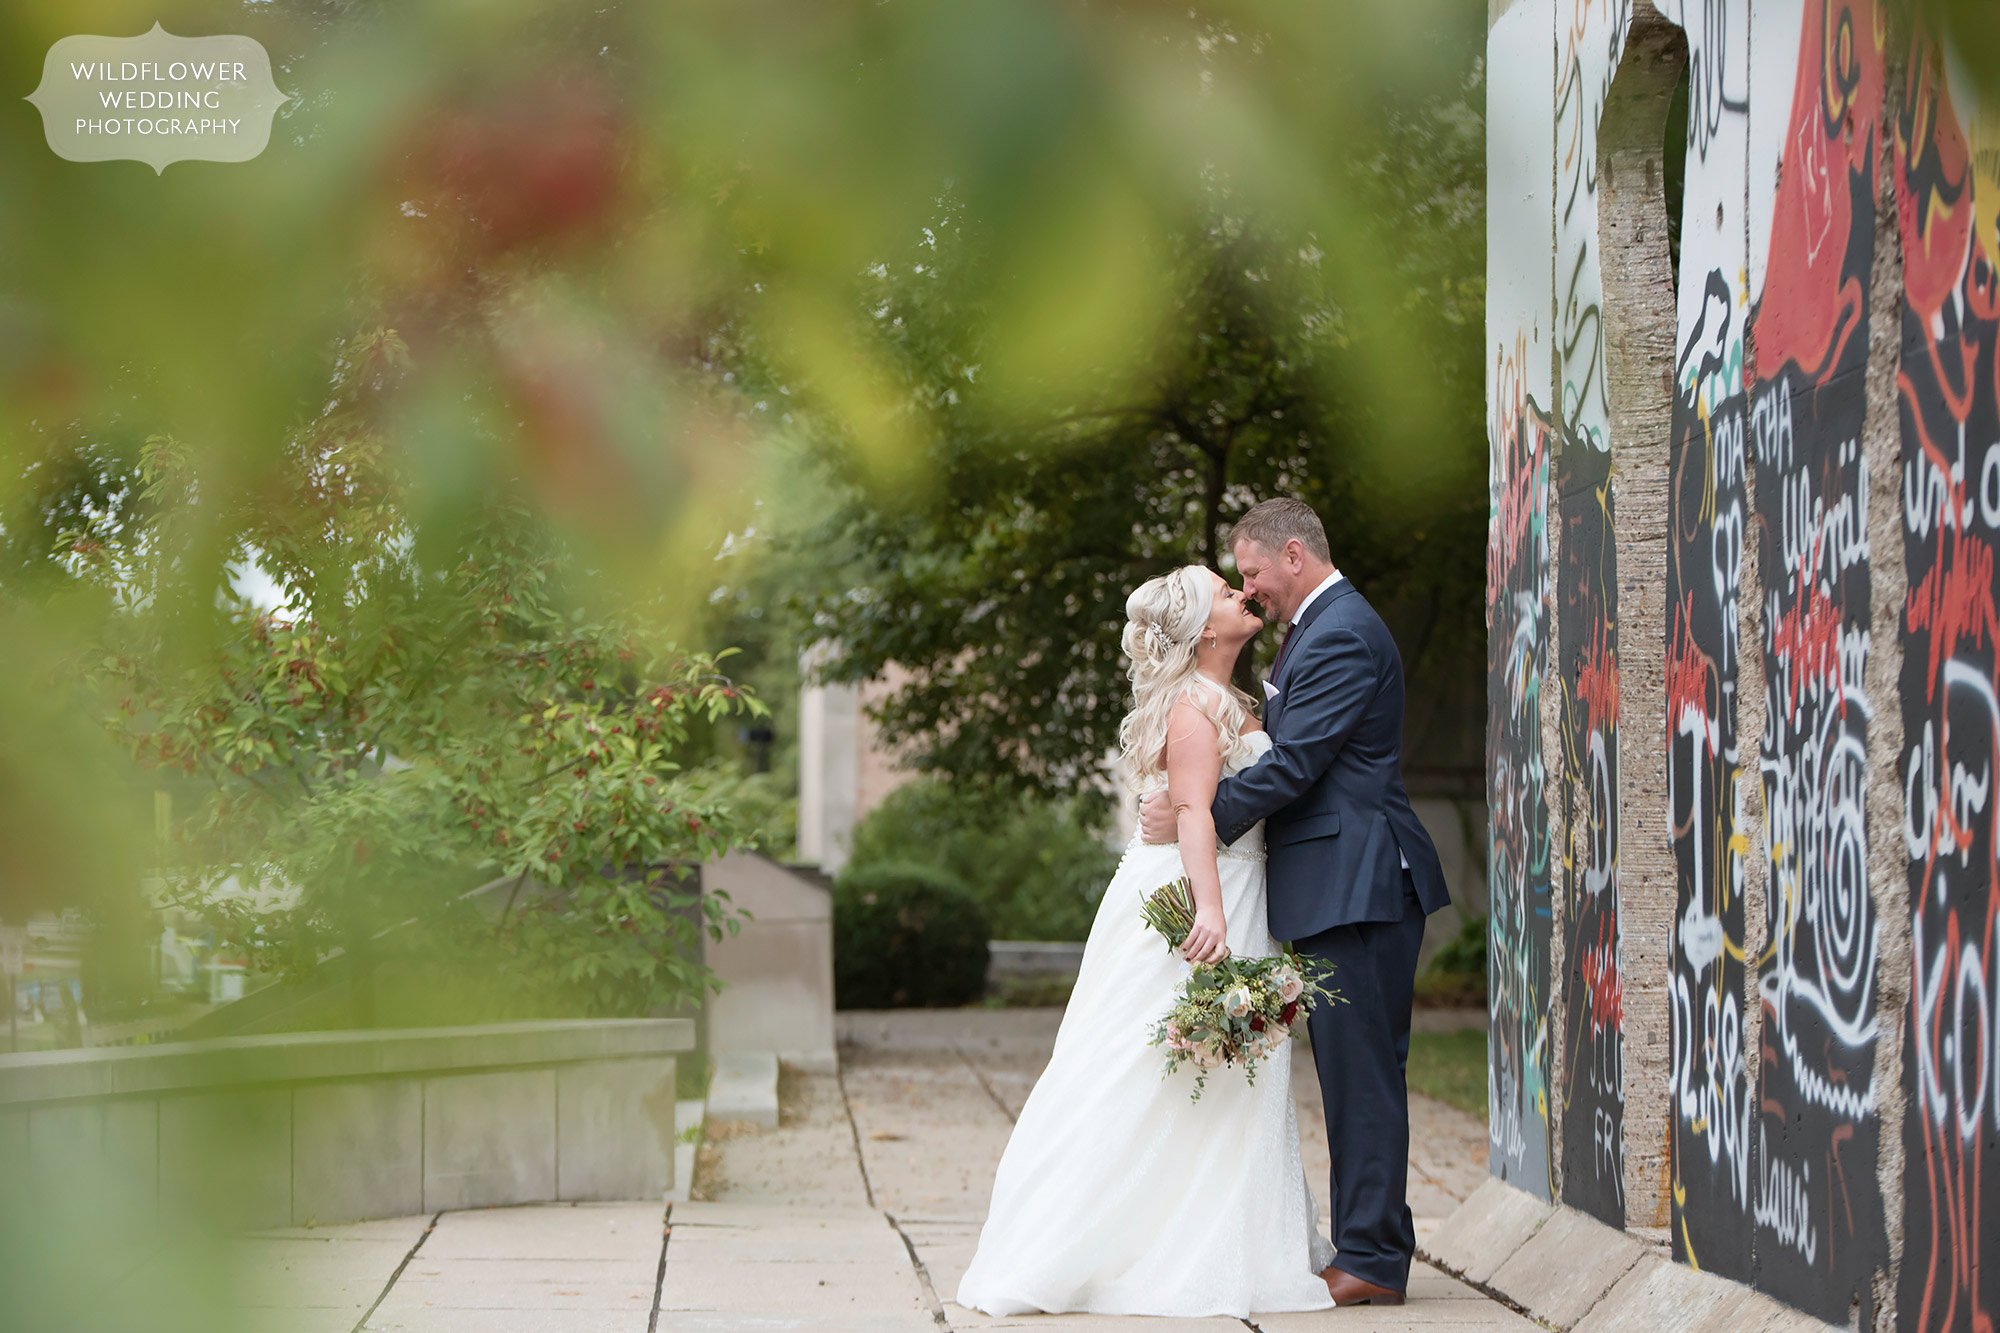 The bride and groom kiss outside before their Churchill Museum wedding by the Berlin Wall in Fulton, MO.